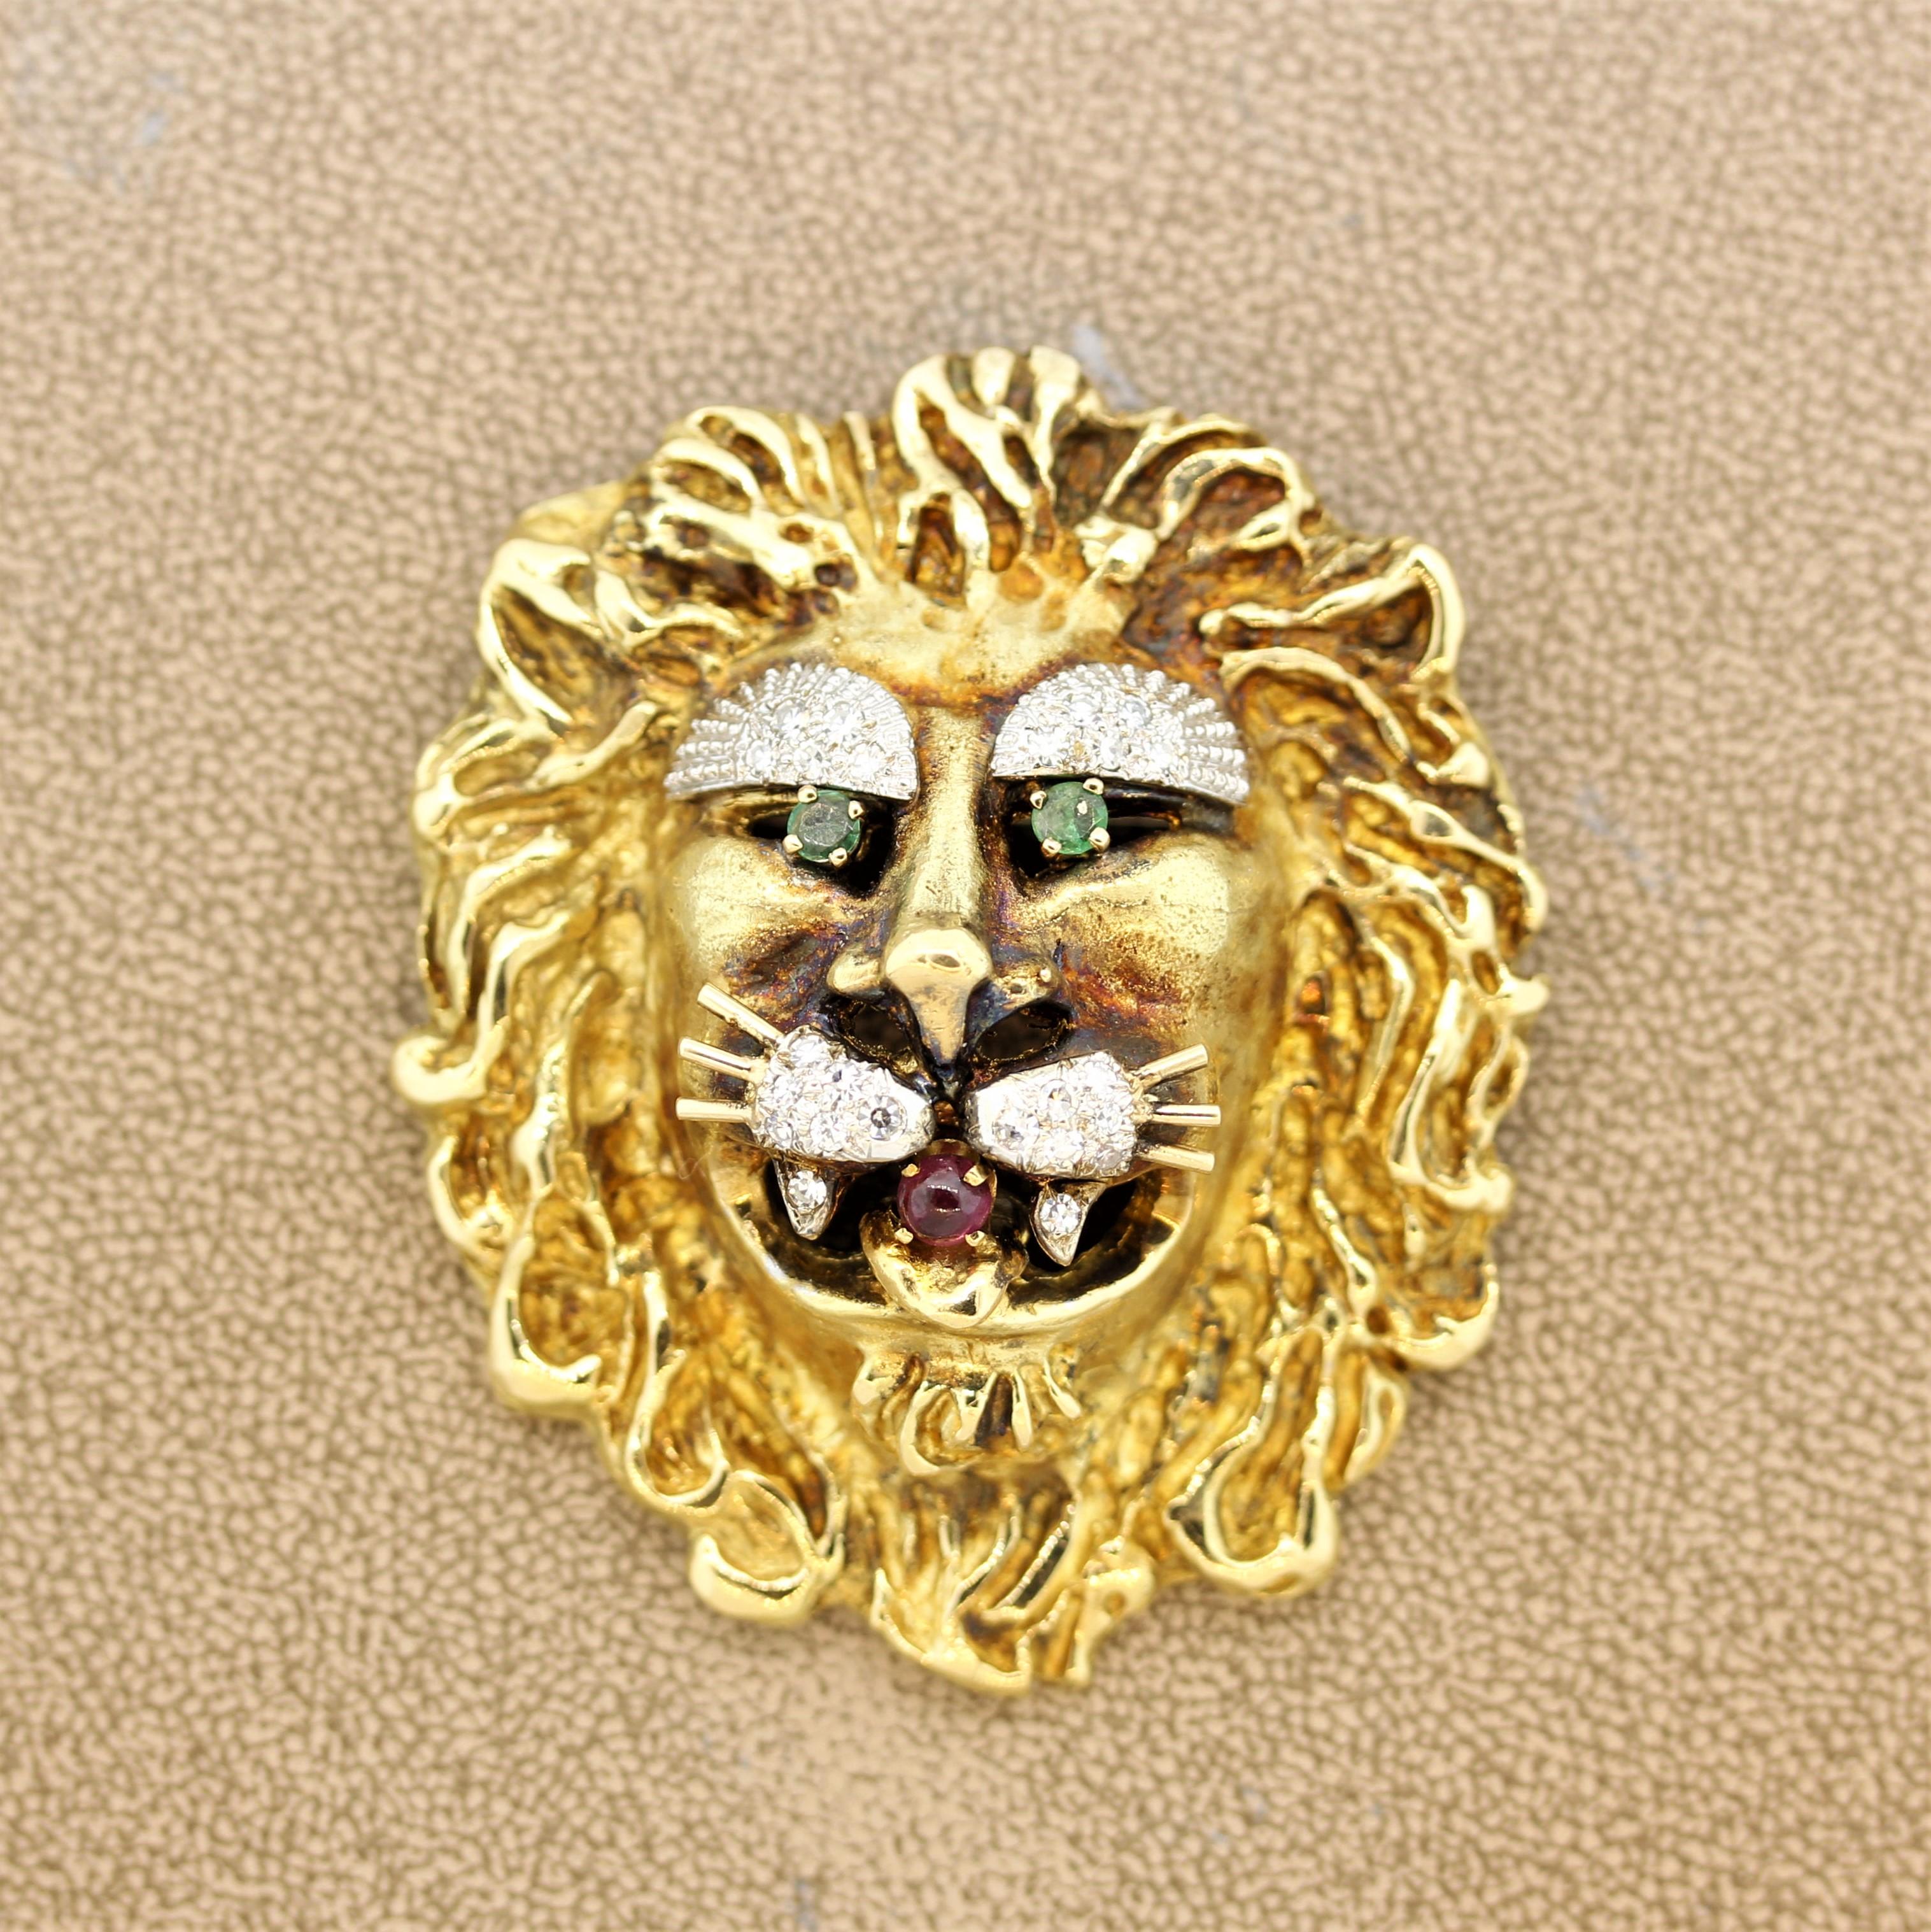 A classic whimsical brooch by Hammerman. The brooch is hand sculpted in 18k yellow gold in the form of a mighty yet sweet lion. It has emerald eyes along with a cabochon ruby mouth and diamond eyebrows and whiskers. The lion’s mane is beautifully